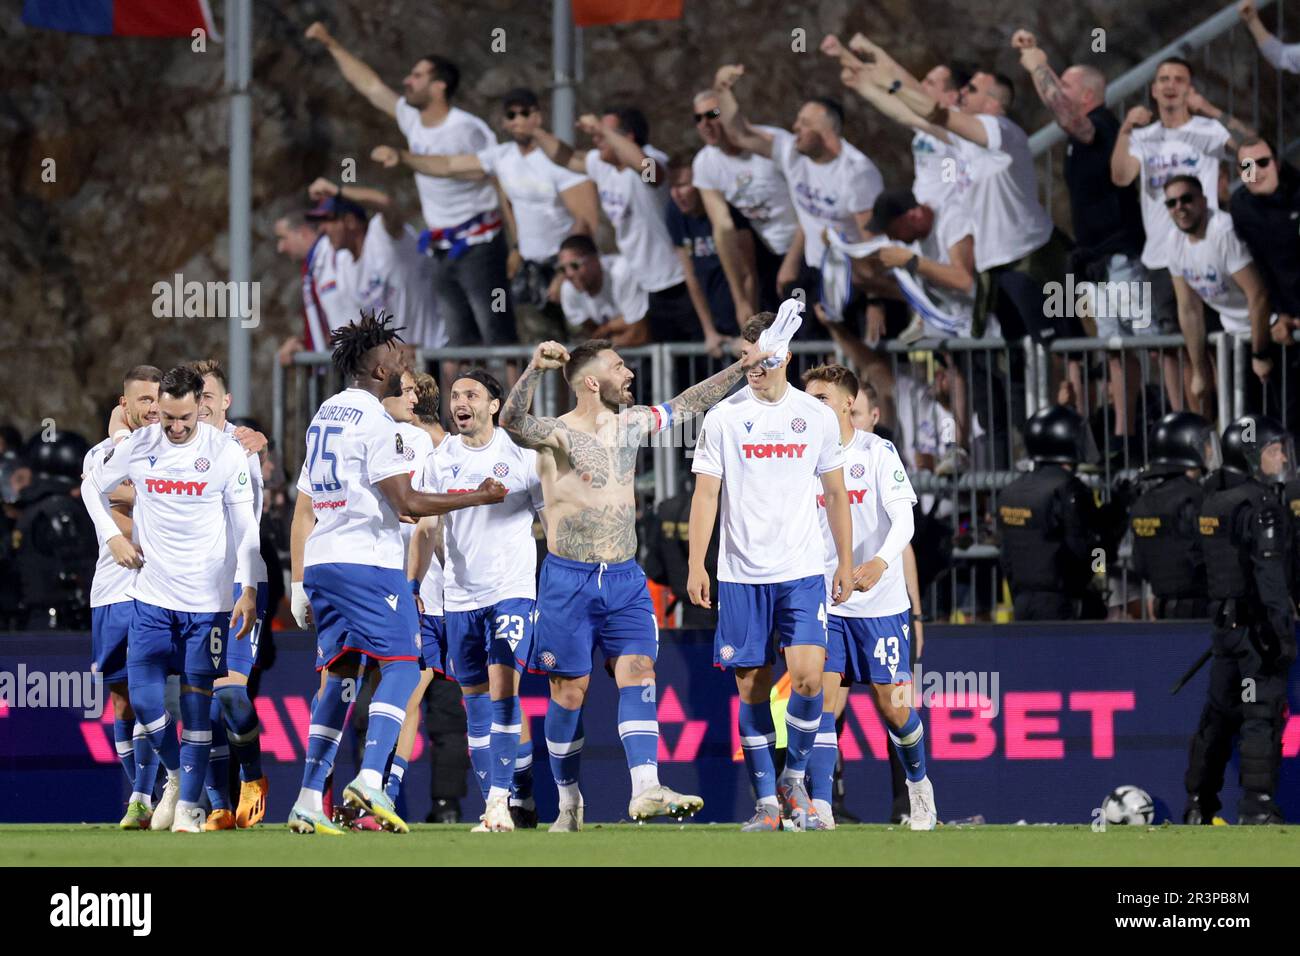 Rijeka, Croatia. 24th May, 2023. Players of Hajduk Split celebrate with the  trophy after the victory against Sibenik in their SuperSport Croatian  Football Cup final match at HNK Rijeka Stadium in Rijeka